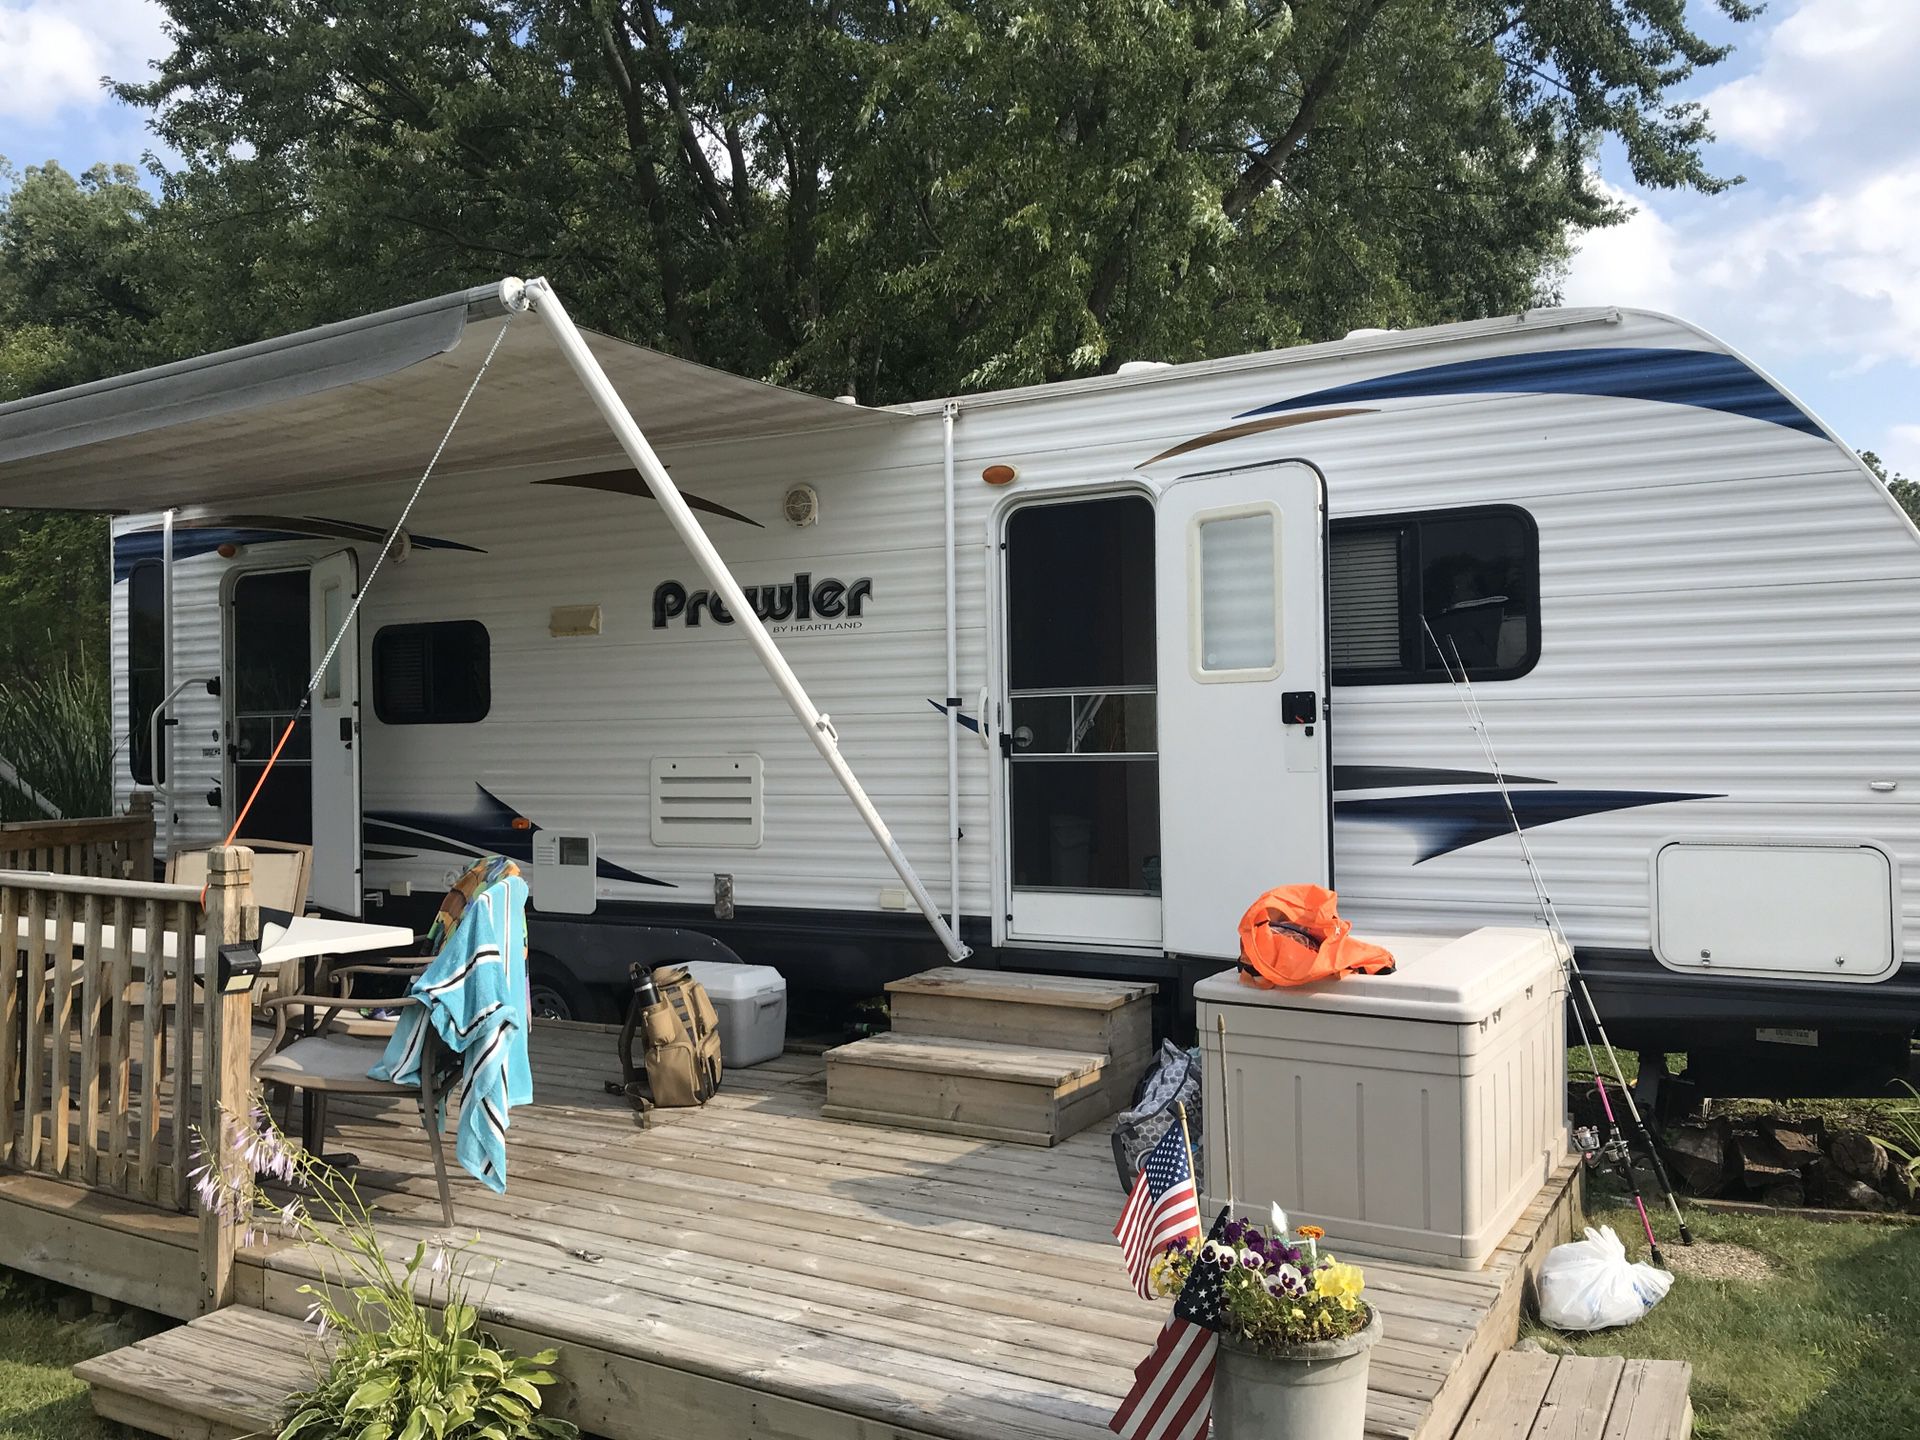 2011 28’ prowler by heartland beautiful camper with all the bells and whistles currently on beautiful lake kegonsa with leasing options available or